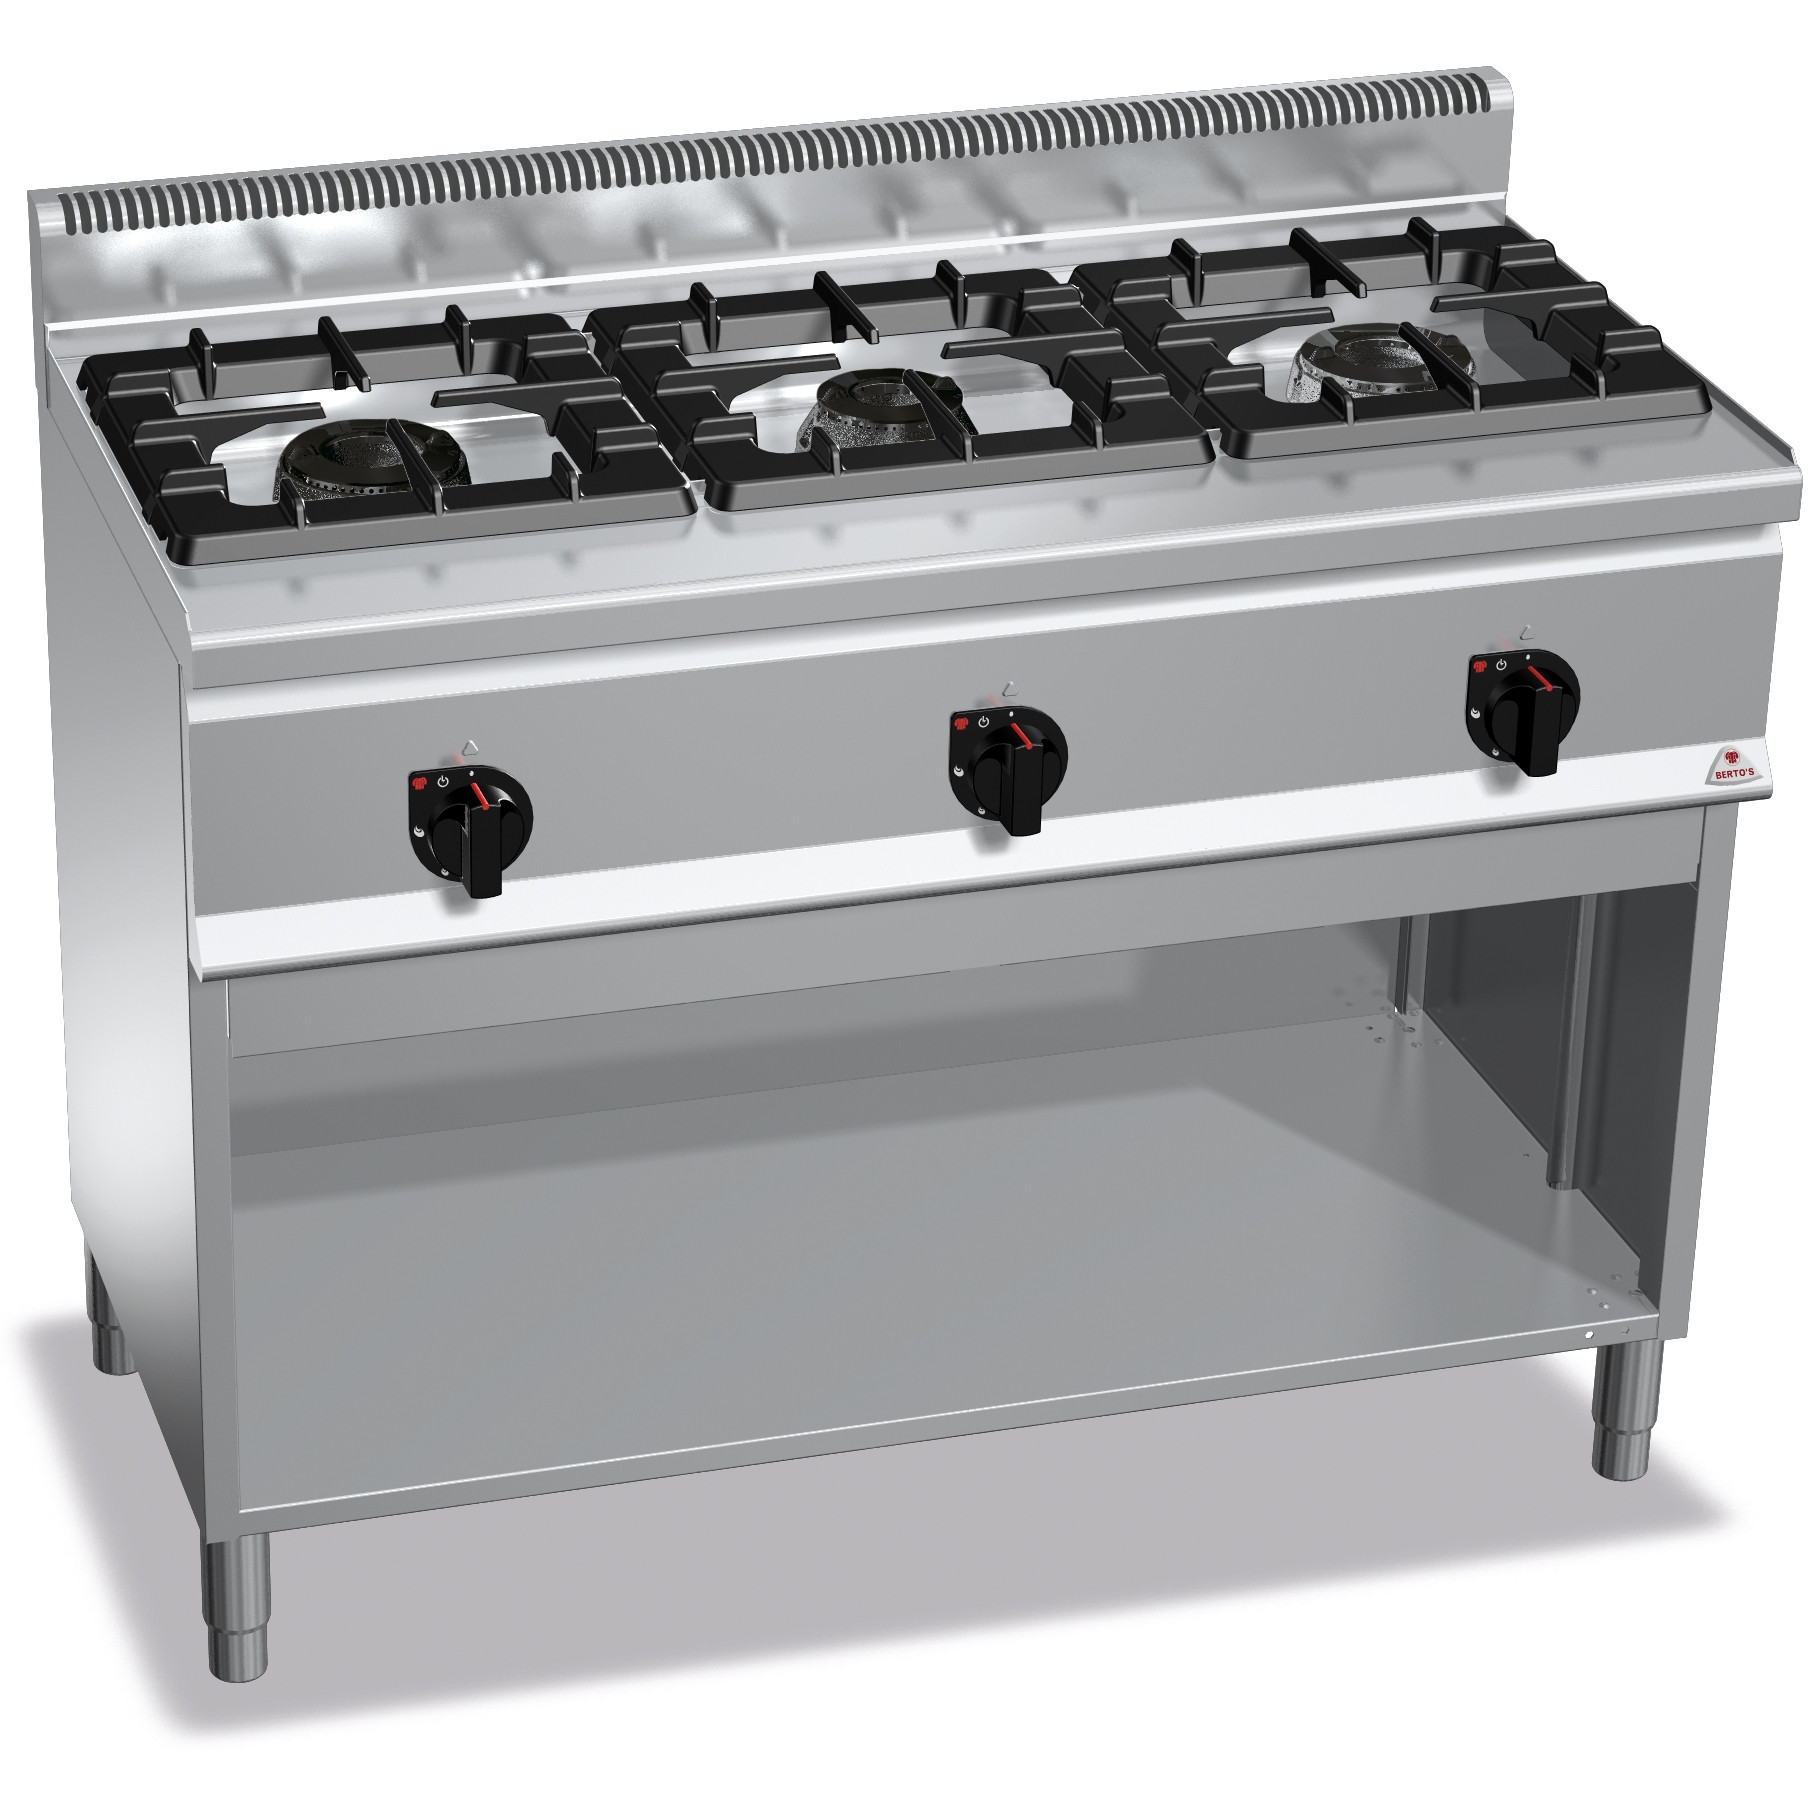 4 Cannucce Inox Curvate+Scovolino Ø6 X 215Mm West. Cod. 101633 - Borz  Cooking Store